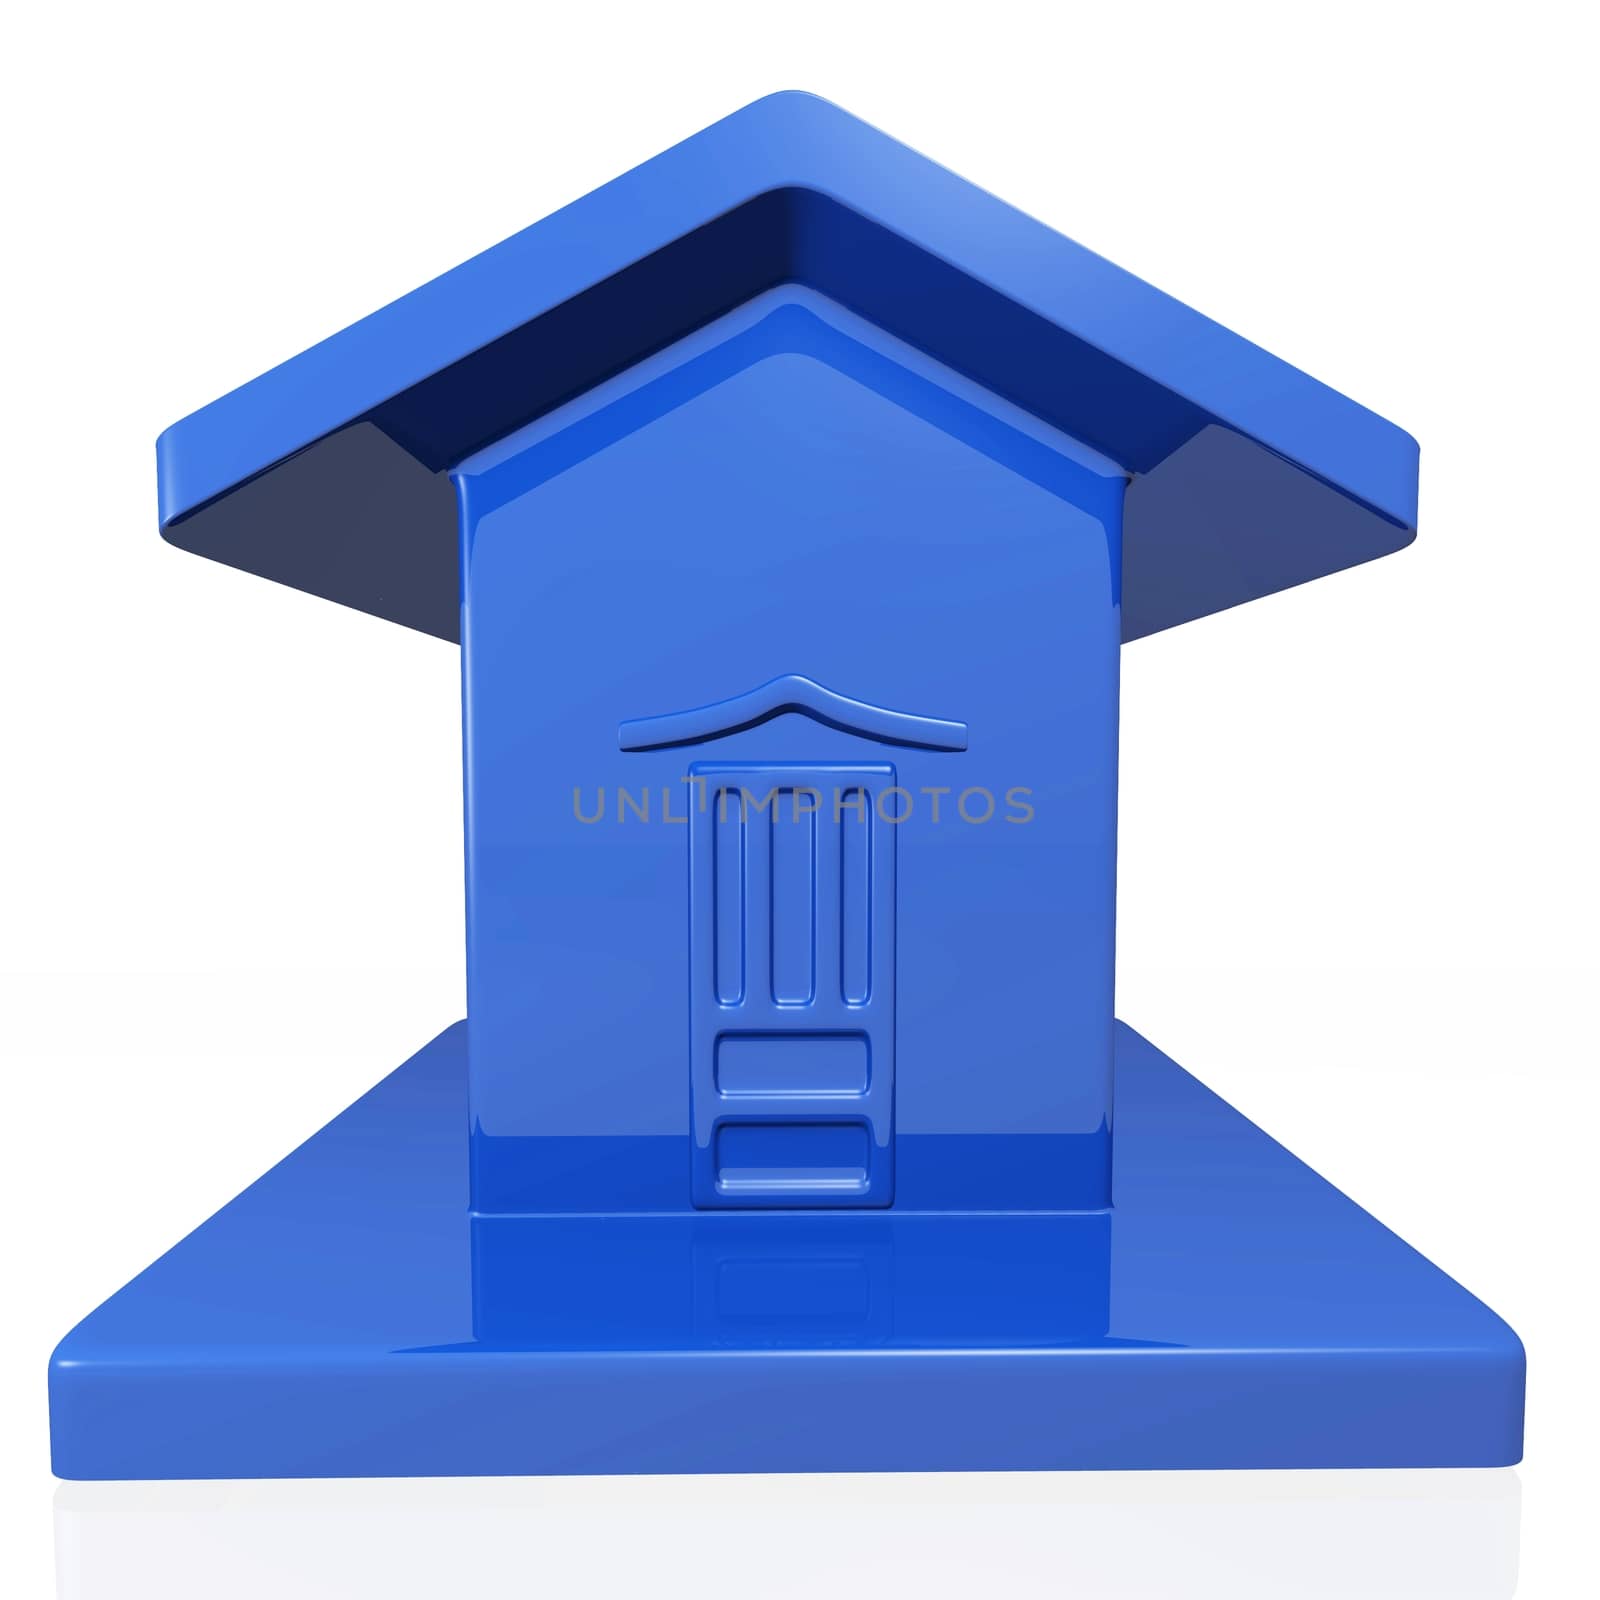 Blue Plastic Model of a House by RichieThakur